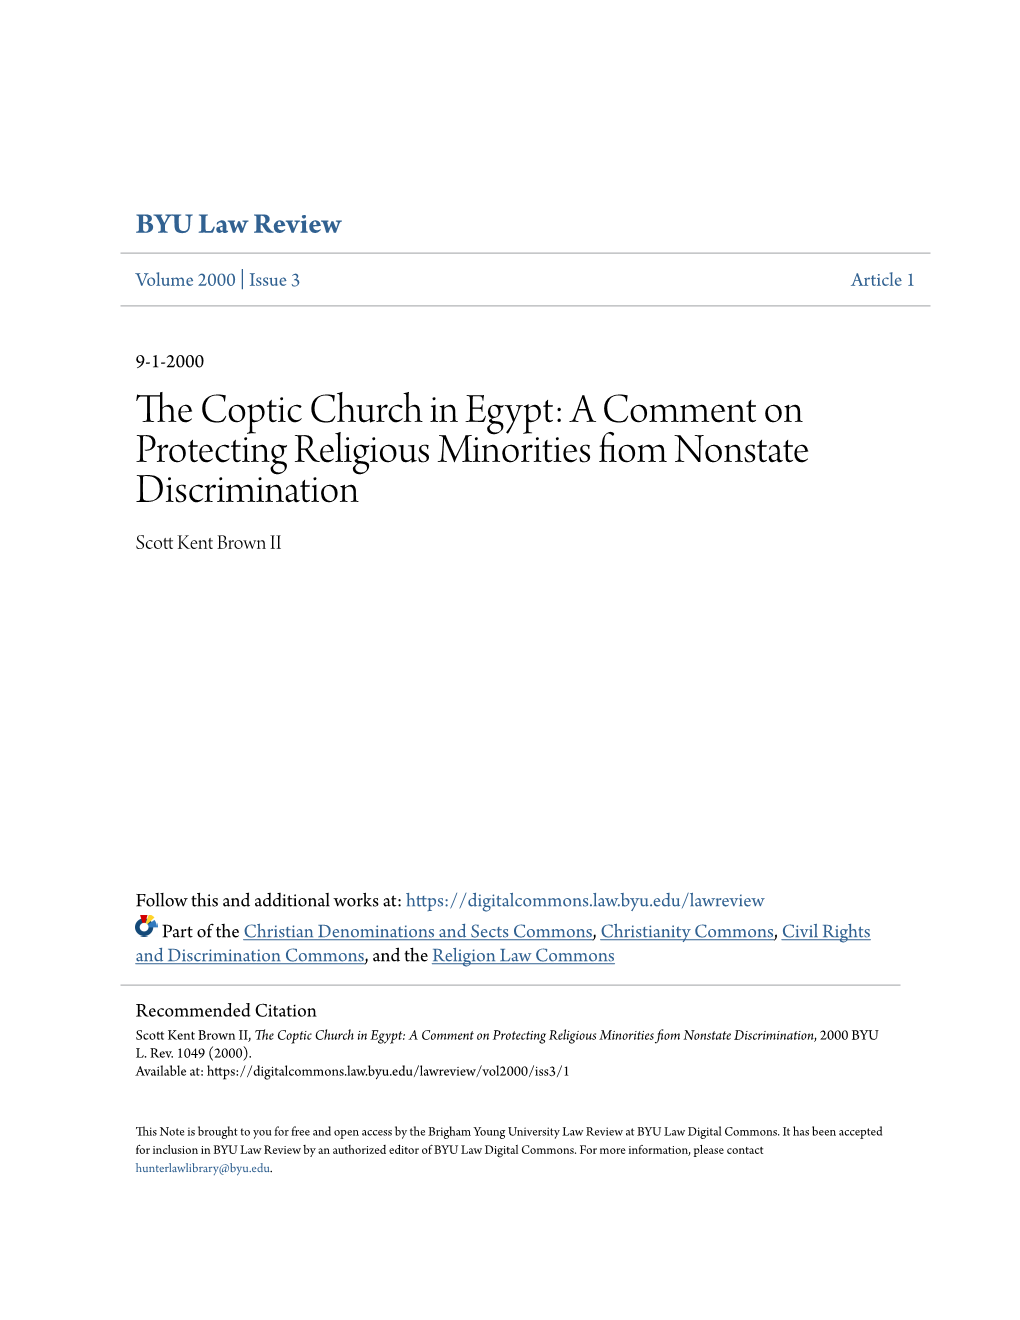 The Coptic Church in Egypt: a Comment on Protecting Religious Minorities Fiom Nonstate Discrimination, 2000 BYU L